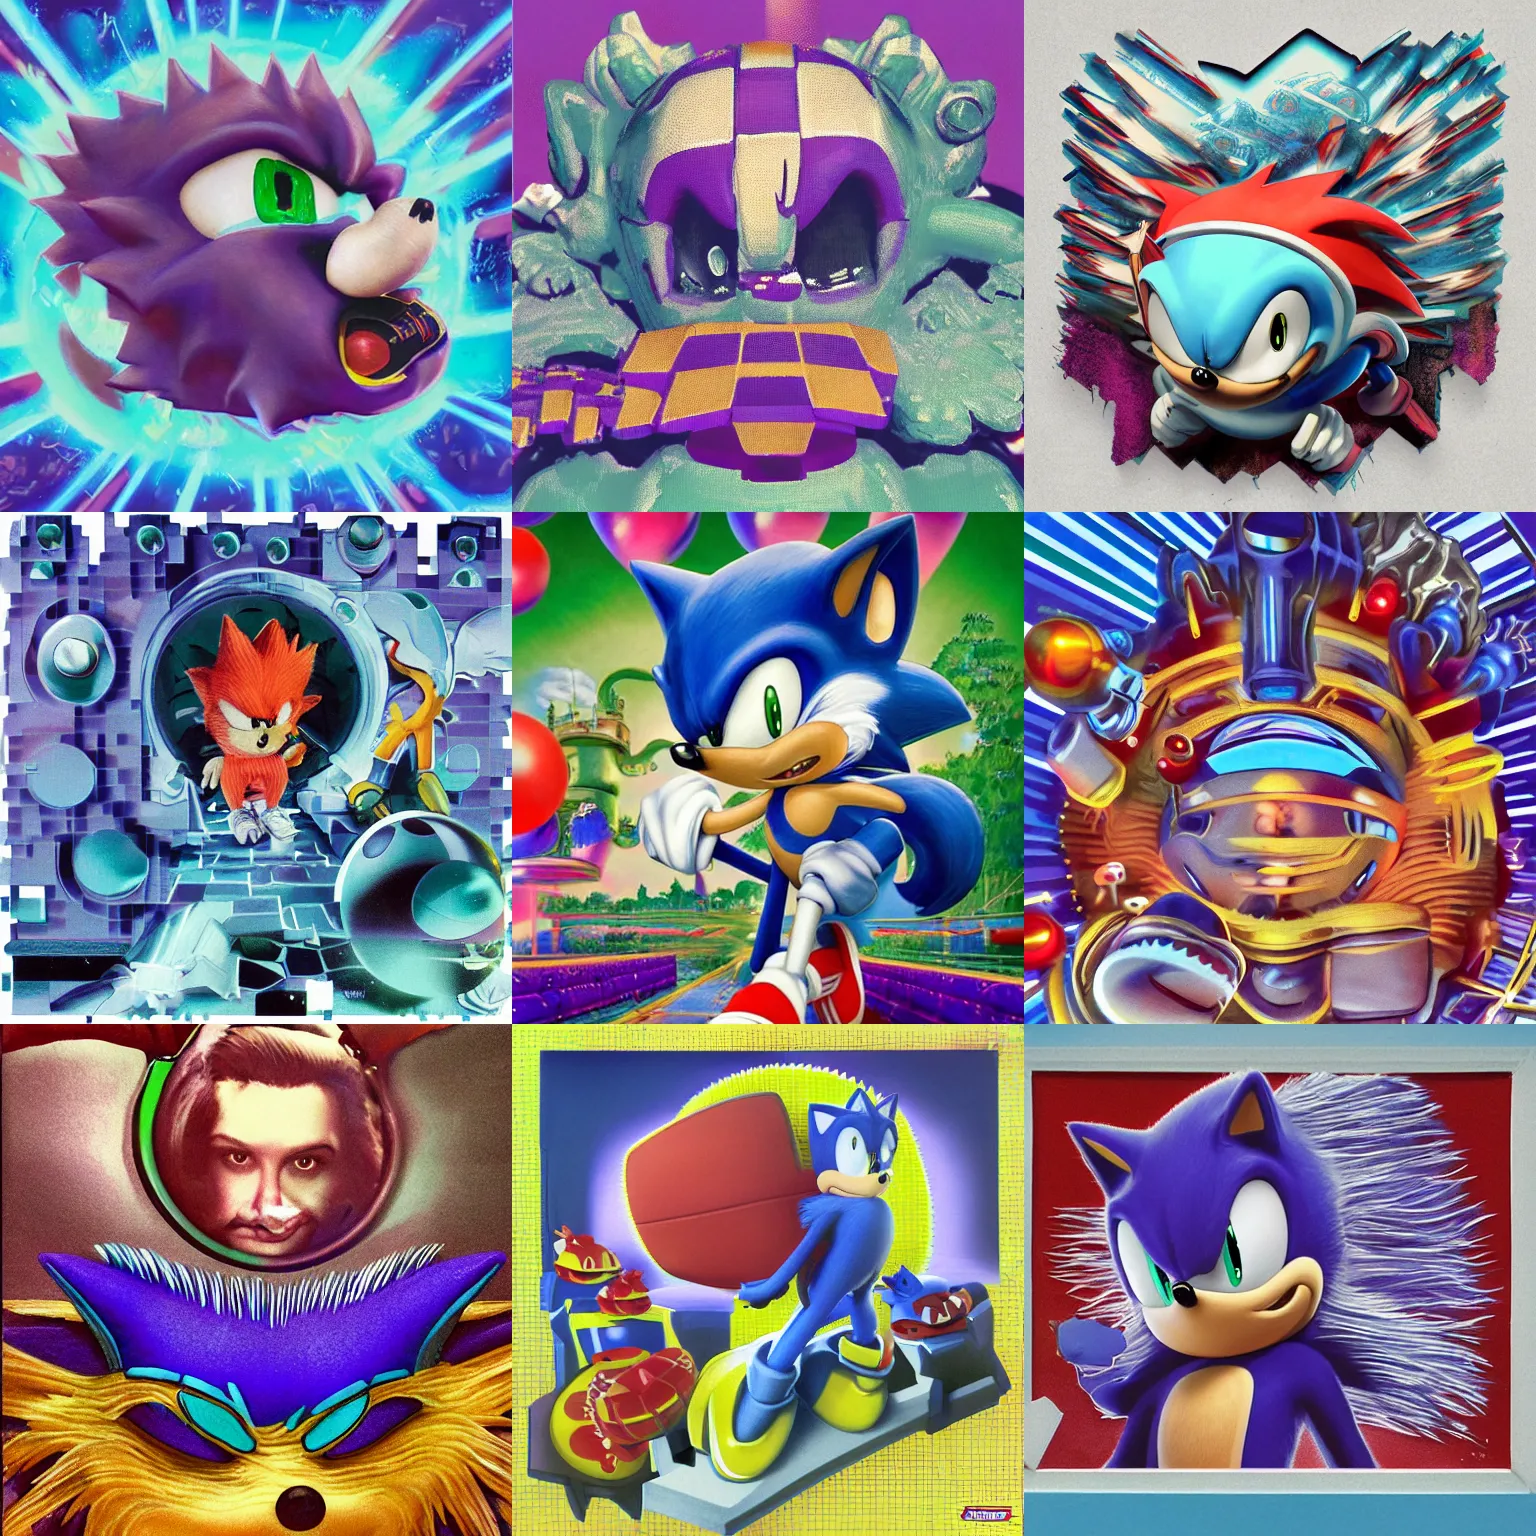 Prompt: sonic hedgehog portrait deconstructivist claymation scifi matte painting lowbrow of a surreal sonic hedgehog, retro moulded professional soft pastels high quality airbrush art album cover of a liquid dissolving airbrush art dreams sonic the hedgehog swimming through dreams purple fisheye checkerboard background 1 9 9 0 s 1 9 9 2 sega genesis video game album cover